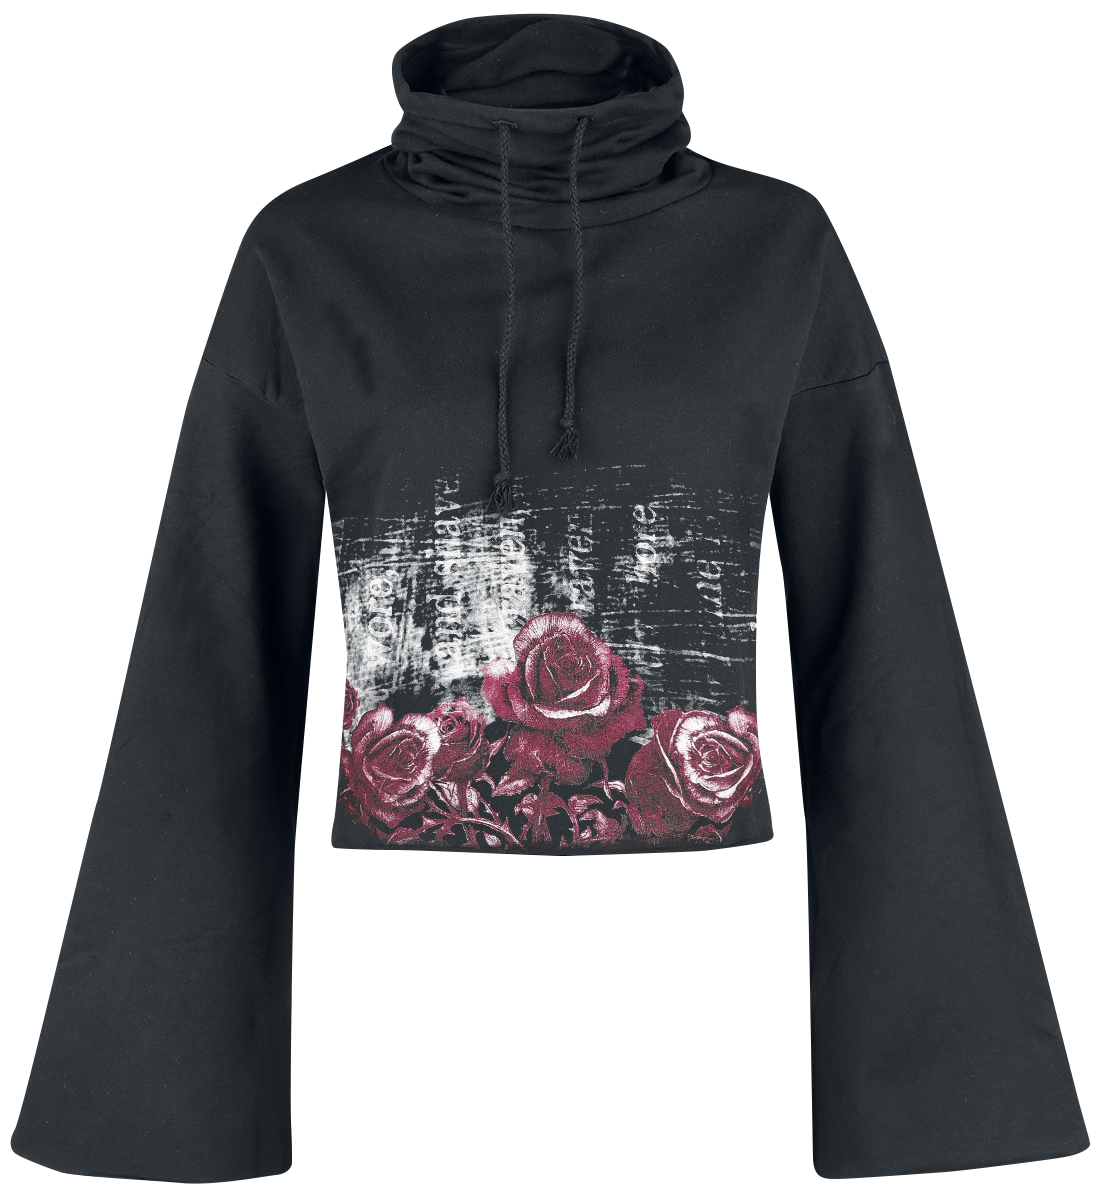 Outer Vision - Nevermore - Girls hooded sweatshirt - black-multicolour image